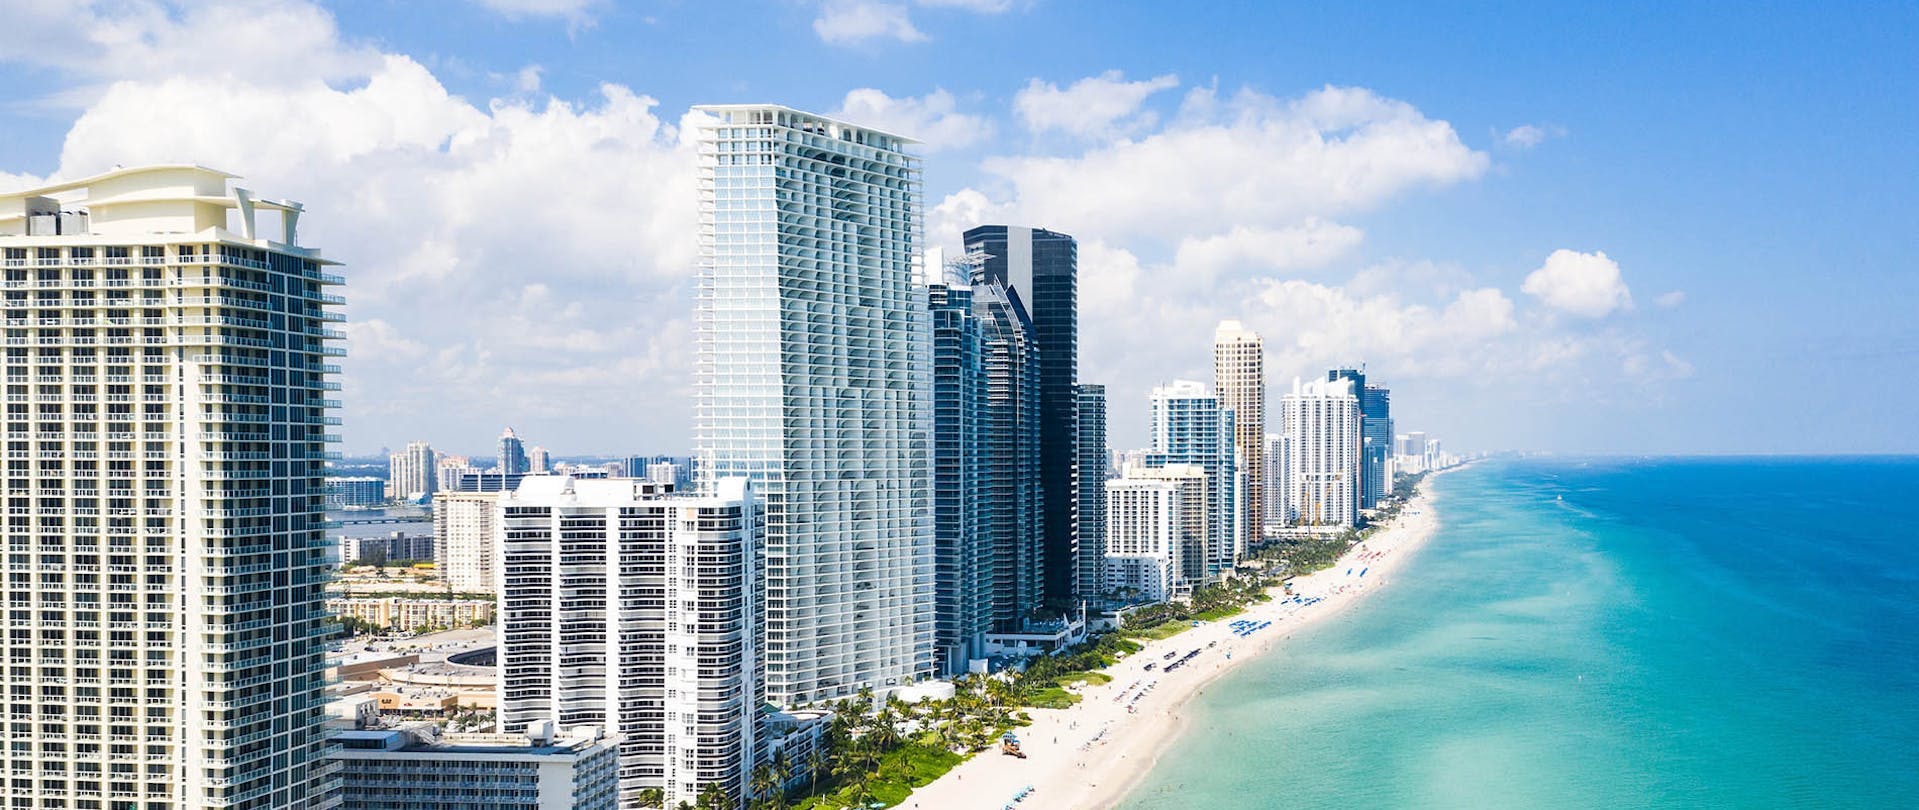 Is Miami Water Quality Safe? A Drinking Water Contaminant Guide